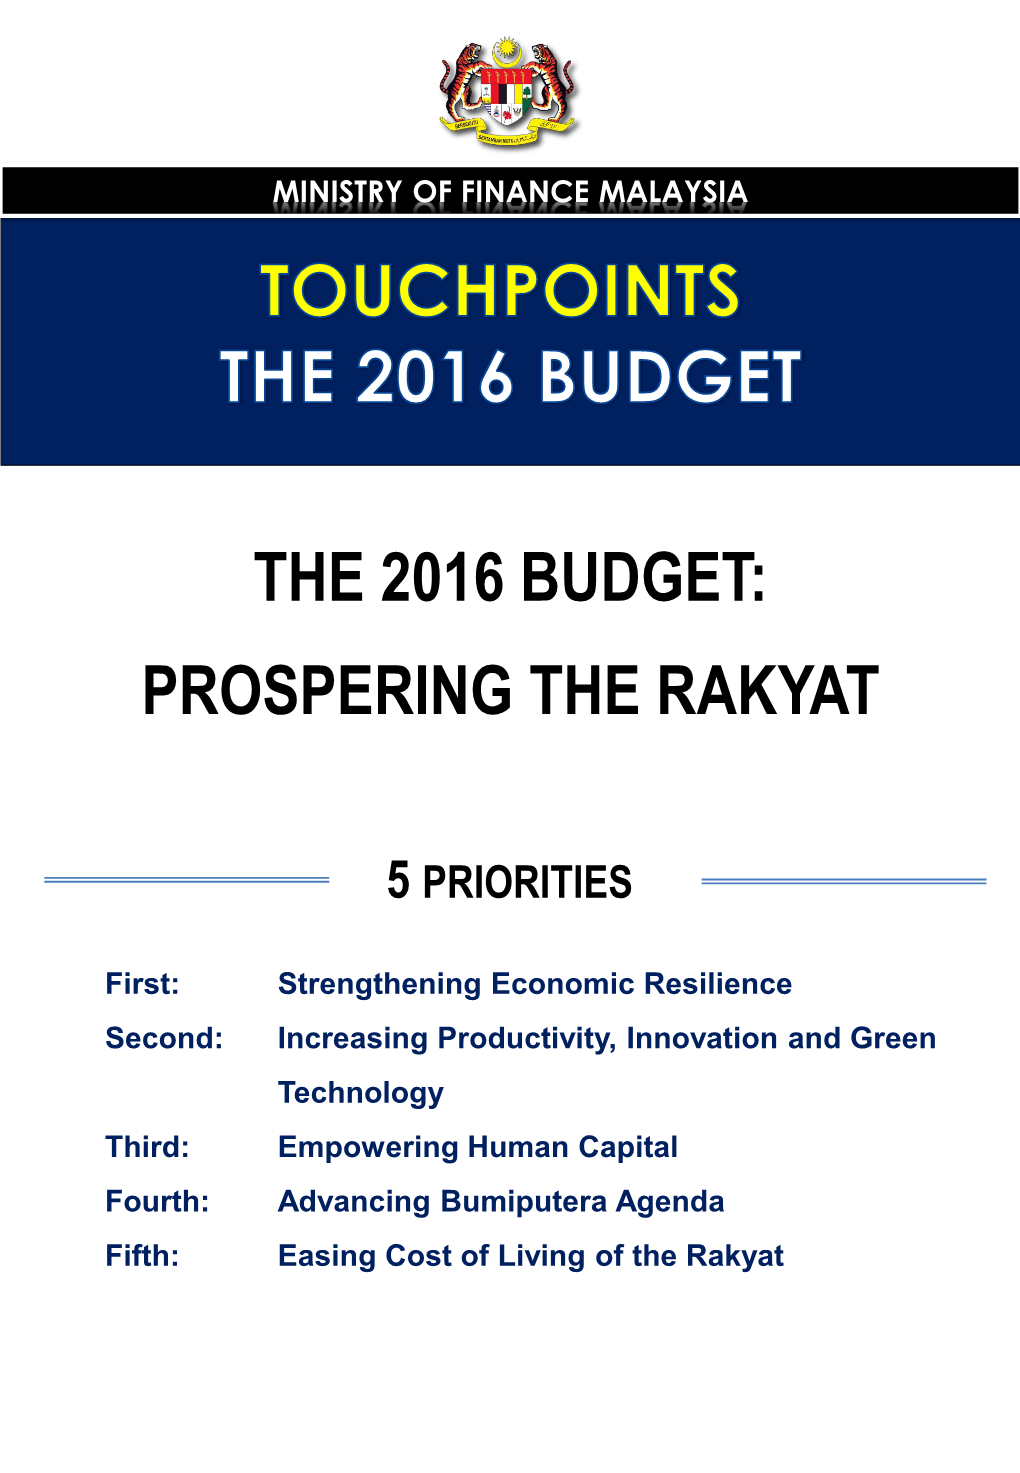 The 2016 Budget